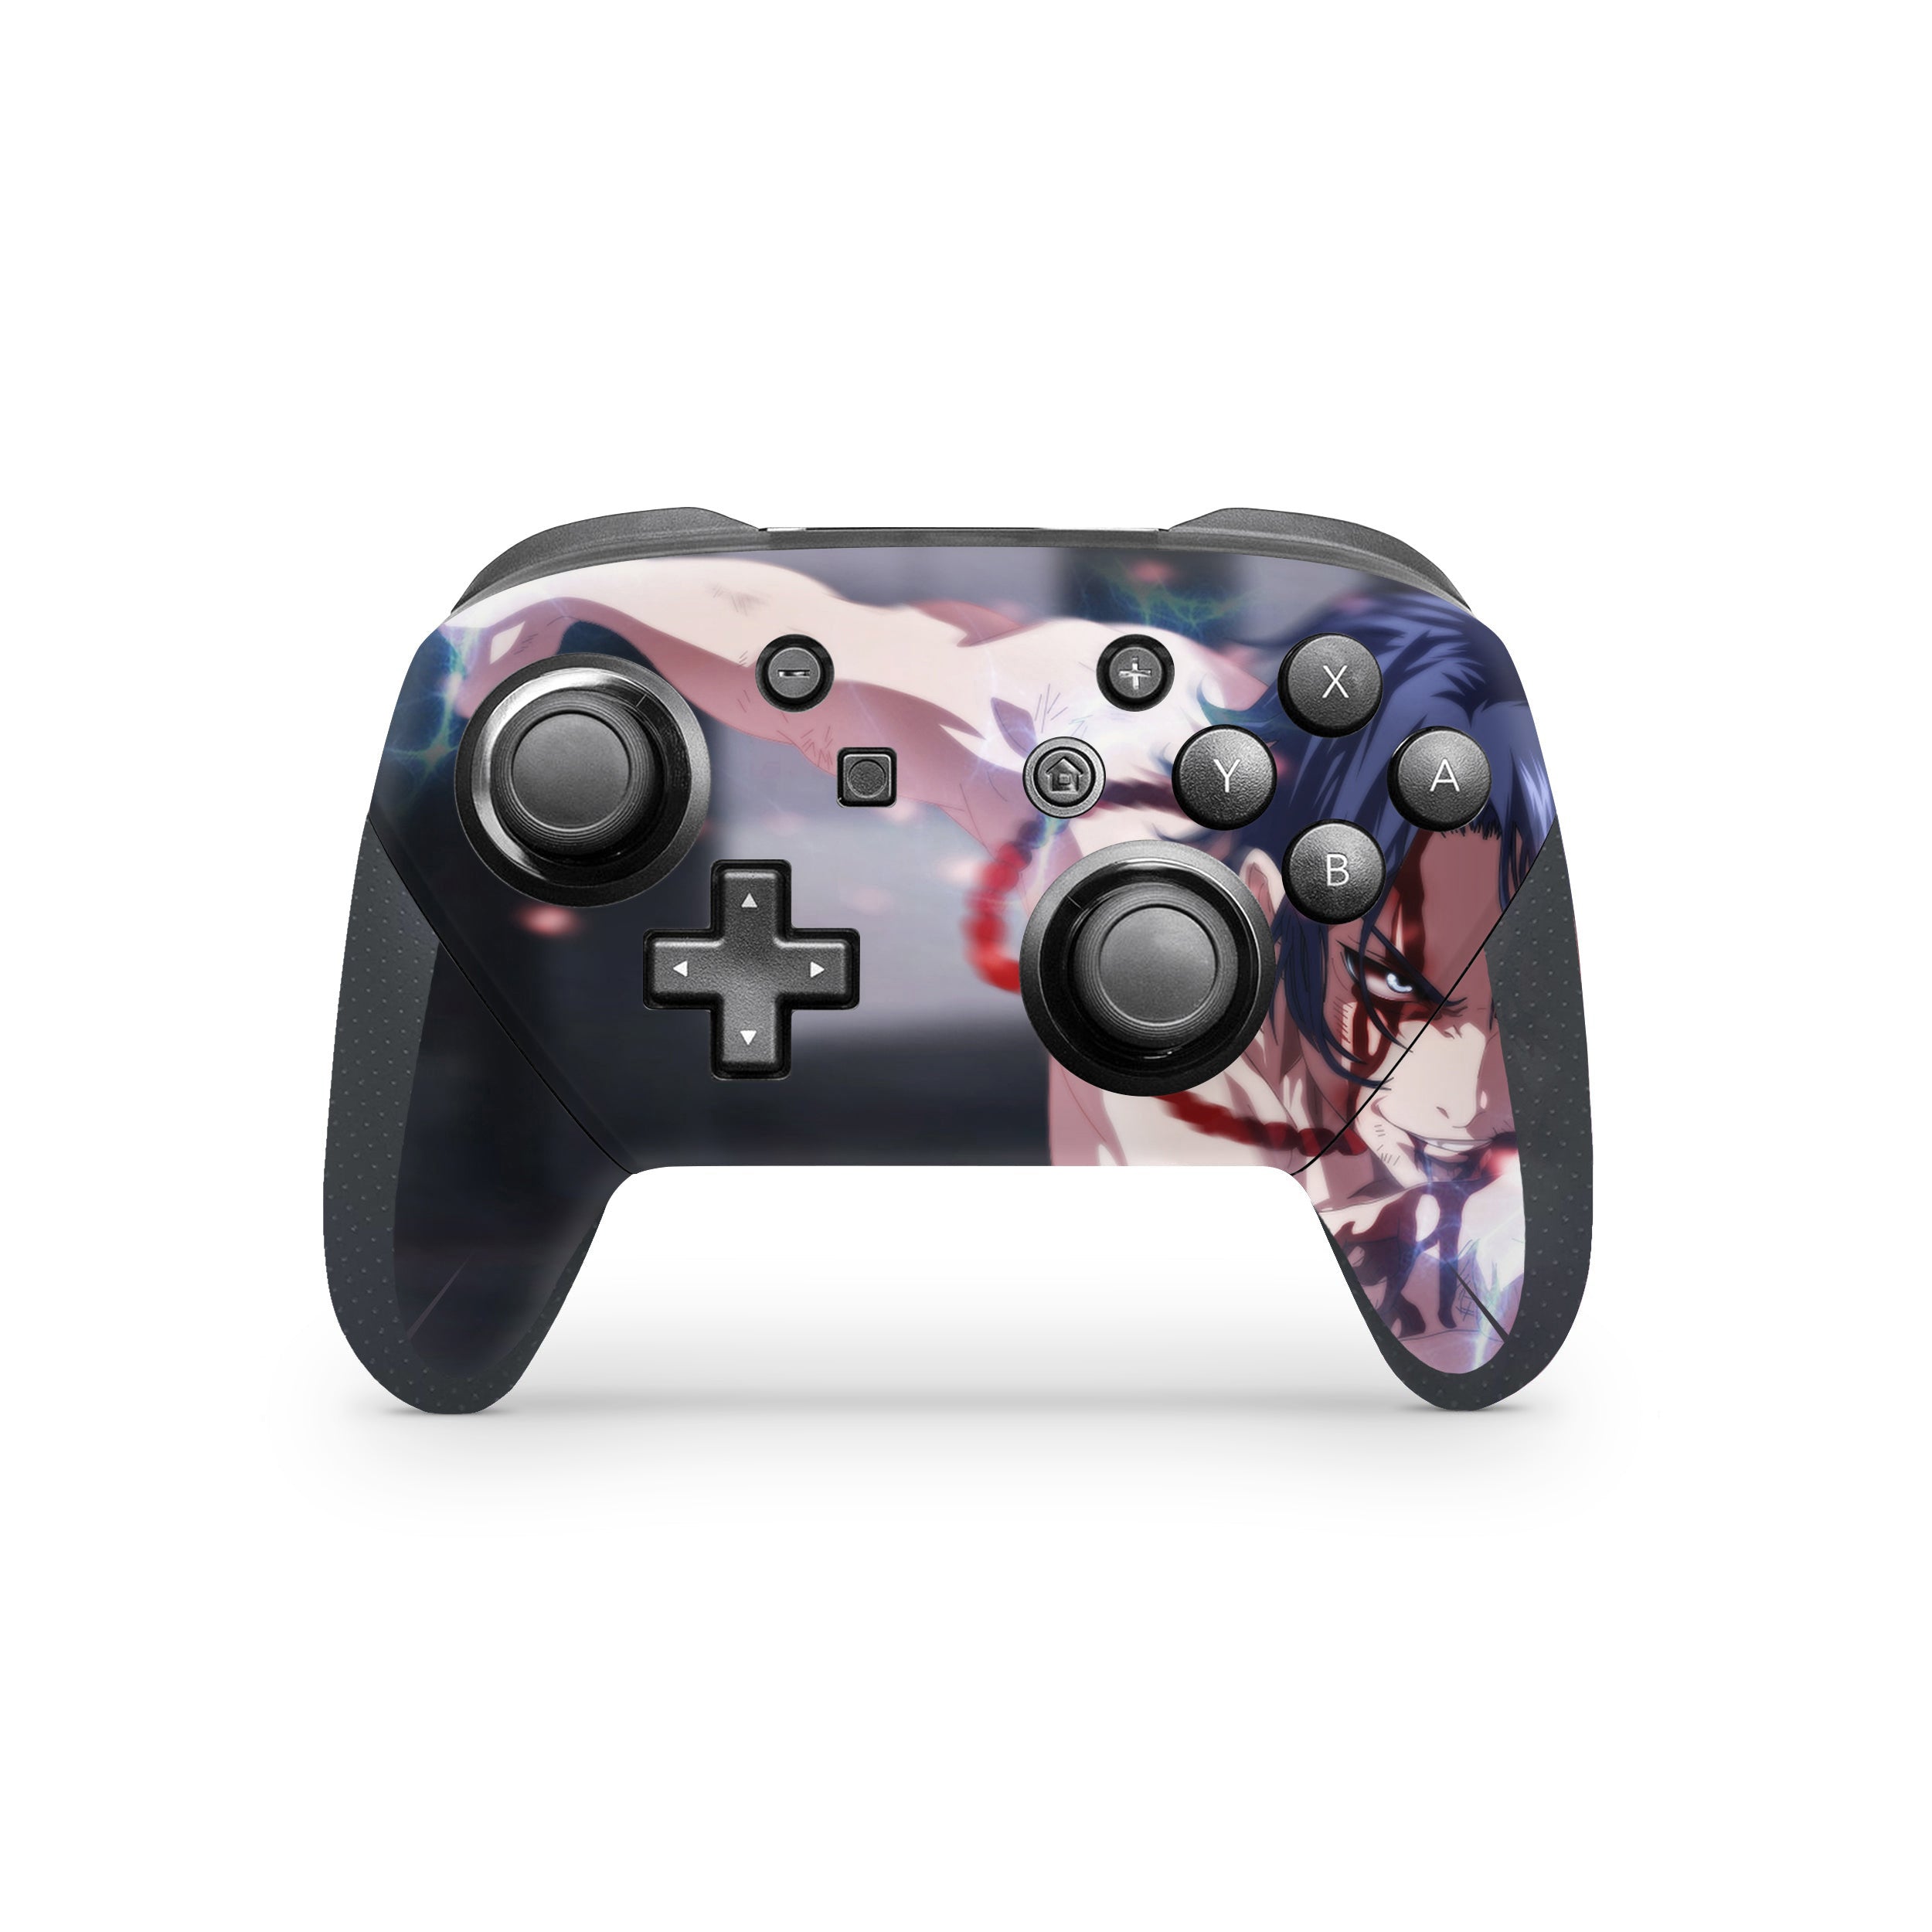 A video game skin featuring a One Piece Portgas D Ace design for the Switch Pro Controller.